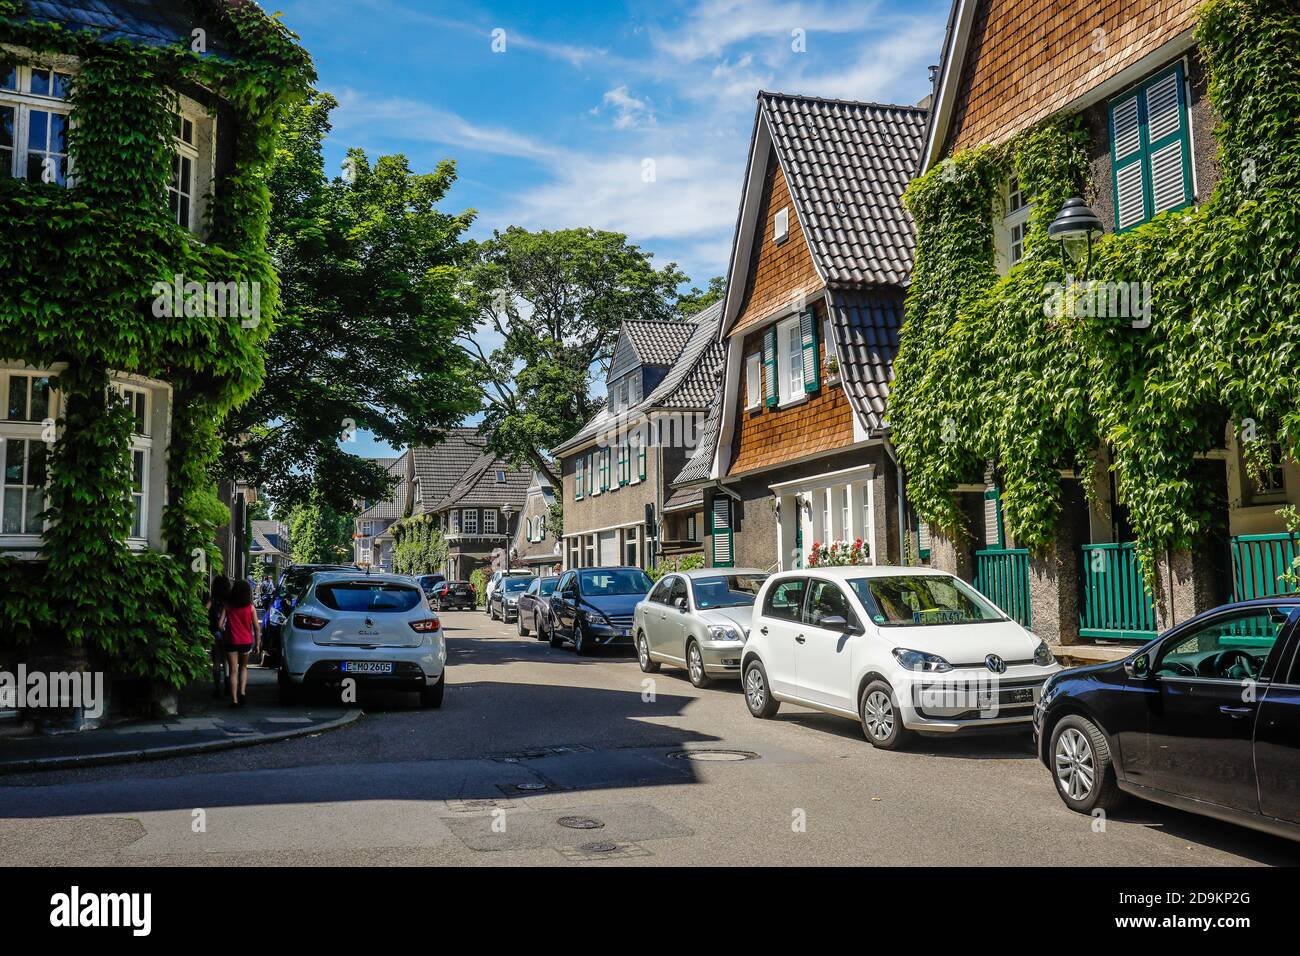 Essen, Ruhr area, North Rhine-Westphalia, Germany, Margarethenhoehe settlement is considered the first German garden city, the 115 hectare settlement managed by the Margarethe Krupp Foundation is an example of human-friendly living and is a must-see in the Ruhr area. Stock Photo